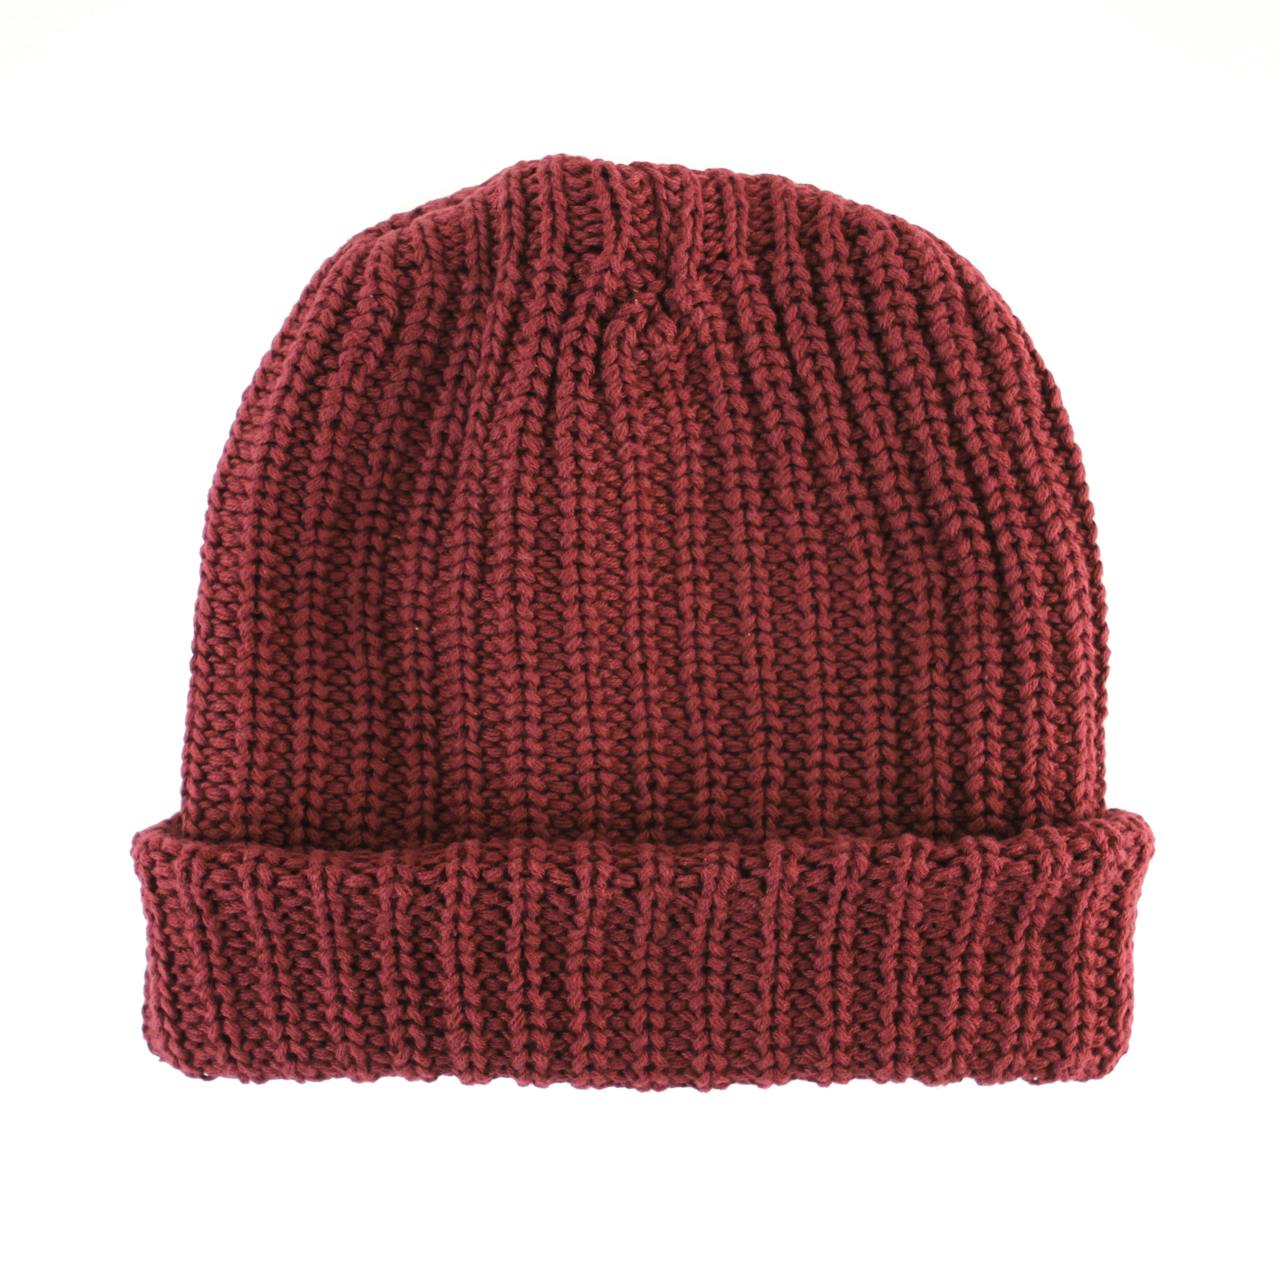 Columbiaknit Knitted Cap